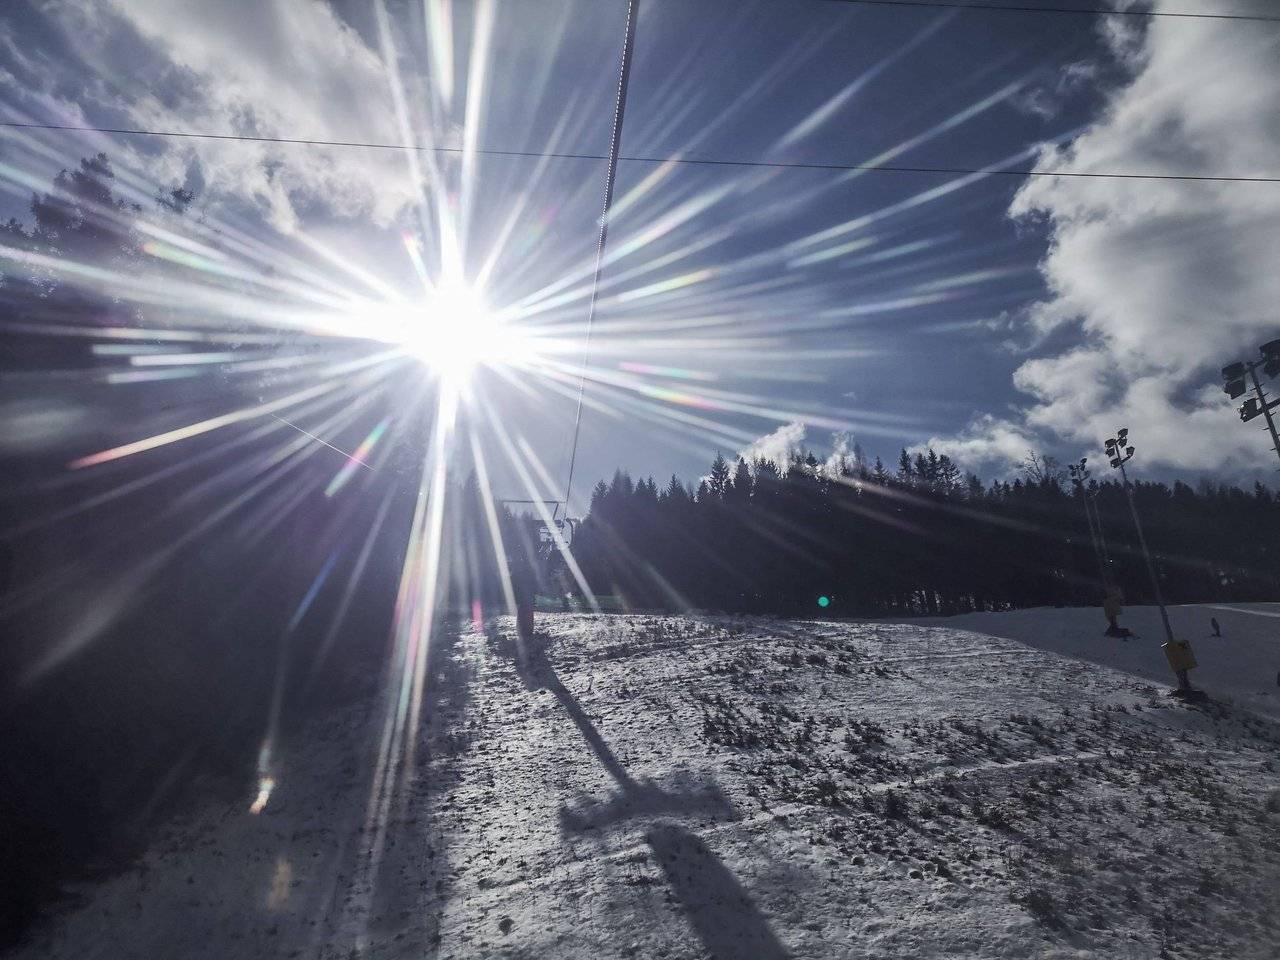   Be sure to take your sun glasses as the sun combined with snow can blind you. Photo by Alis Monte [CC BY-SA 4.0], via Connecting the Dots